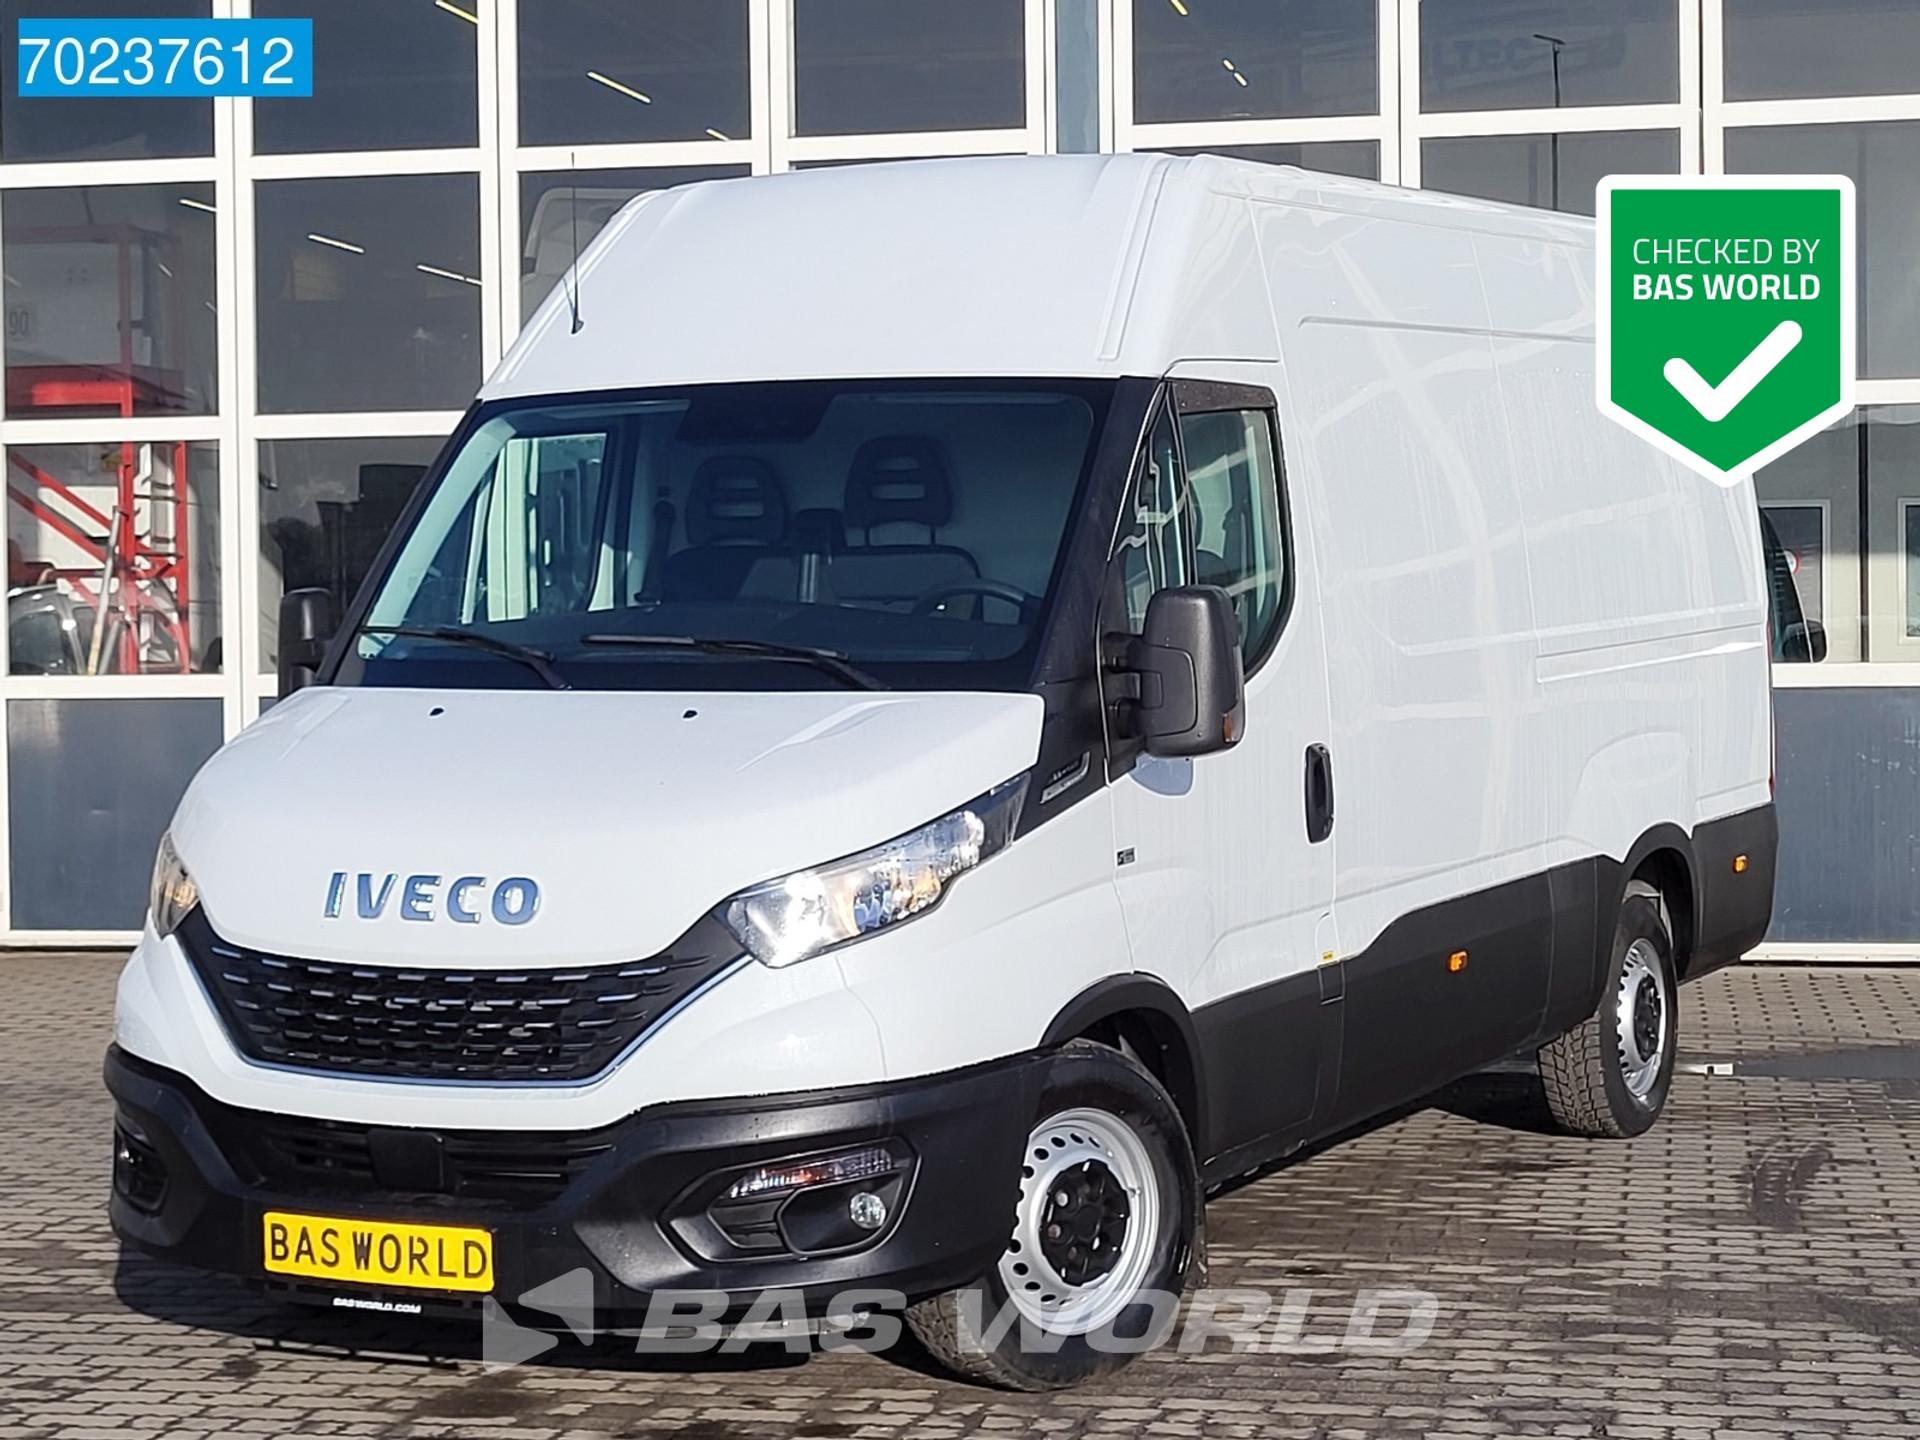 Foto 1 van Iveco Daily 35S14 Automaat L2H2 Airco Cruise Nwe model 3500kg trekgewicht 12m3 Airco Cruise control